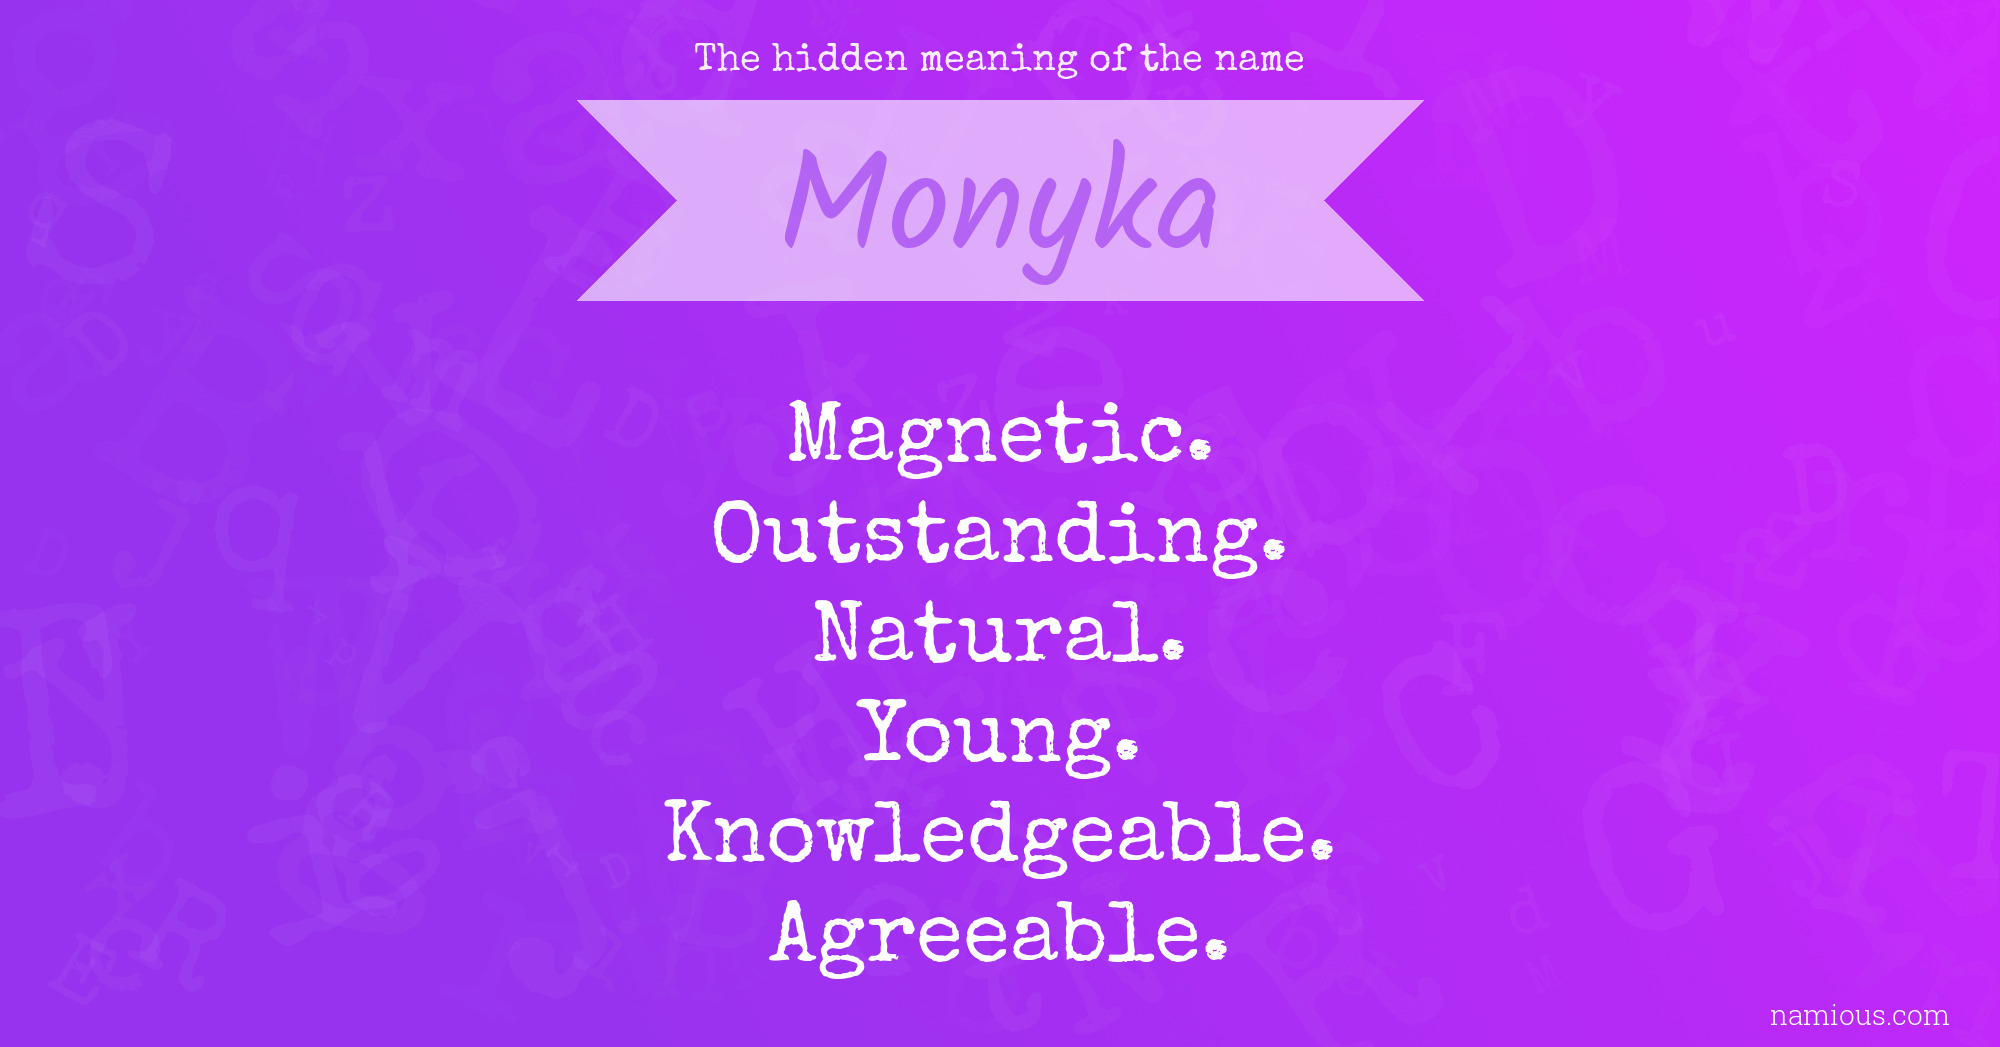 The hidden meaning of the name Monyka